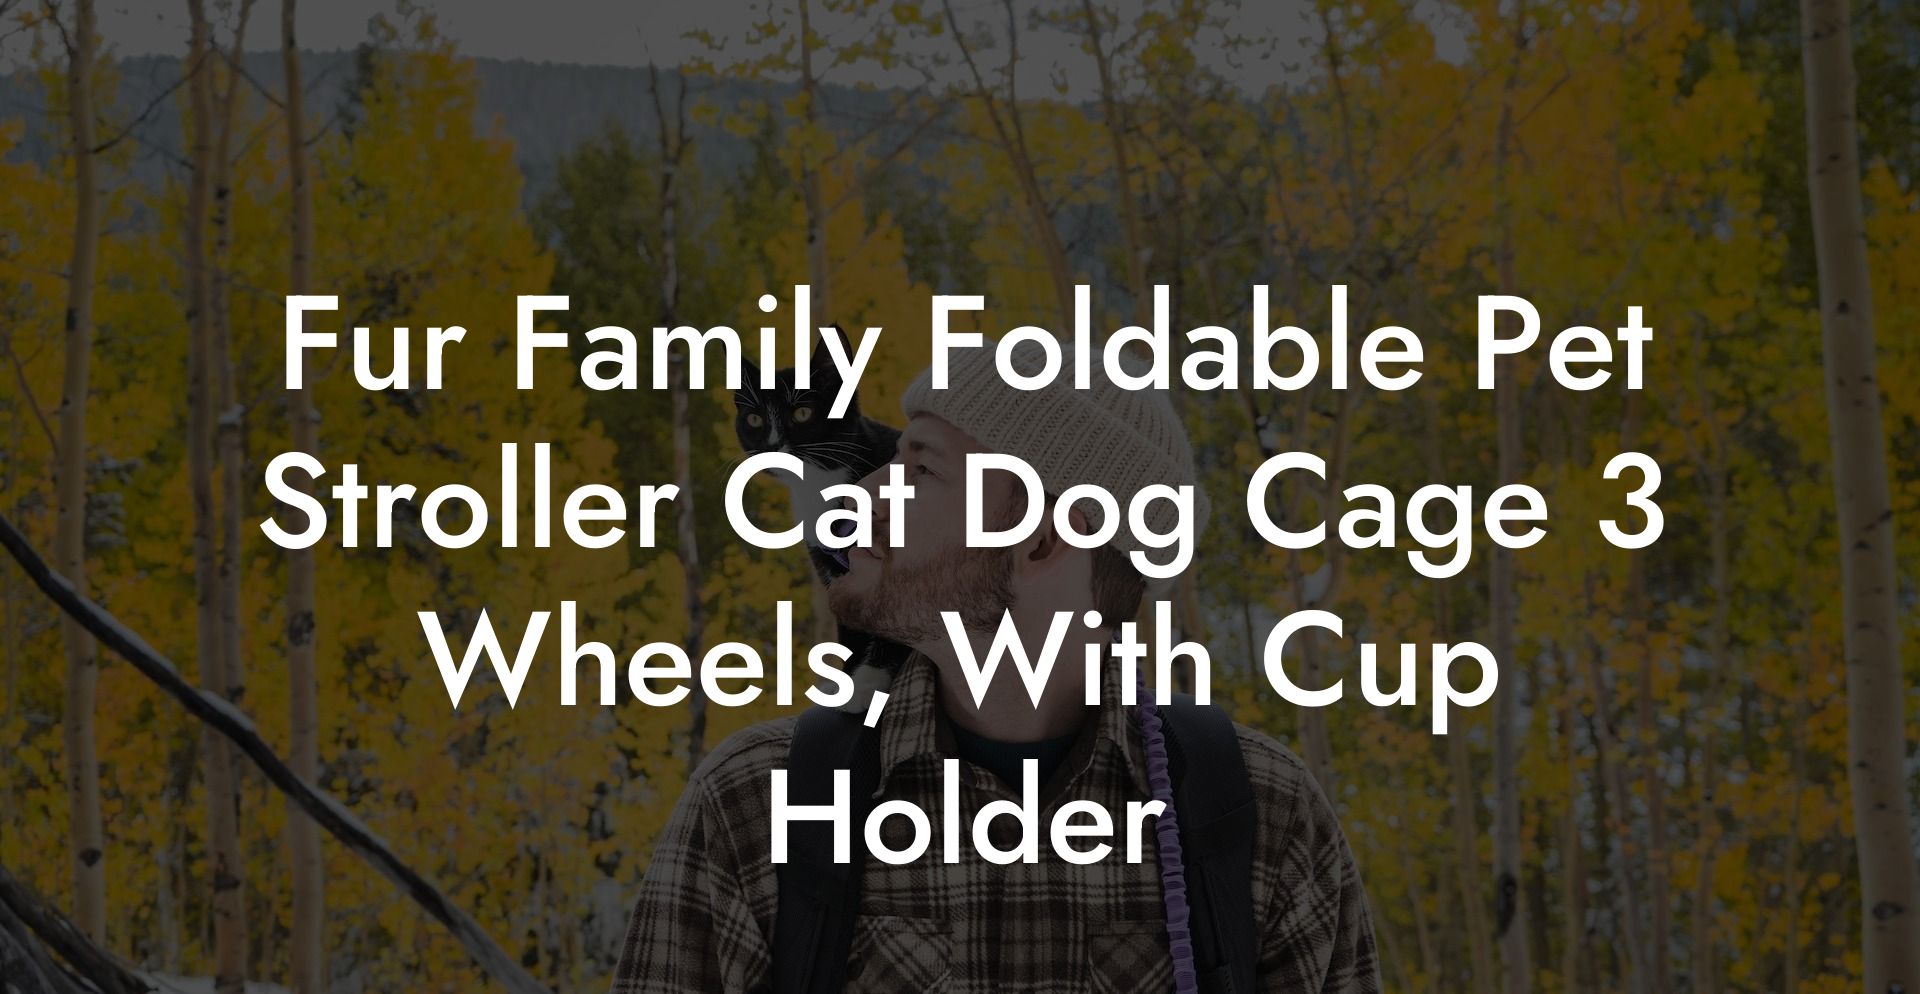 Fur Family Foldable Pet Stroller Cat Dog Cage 3 Wheels, With Cup Holder